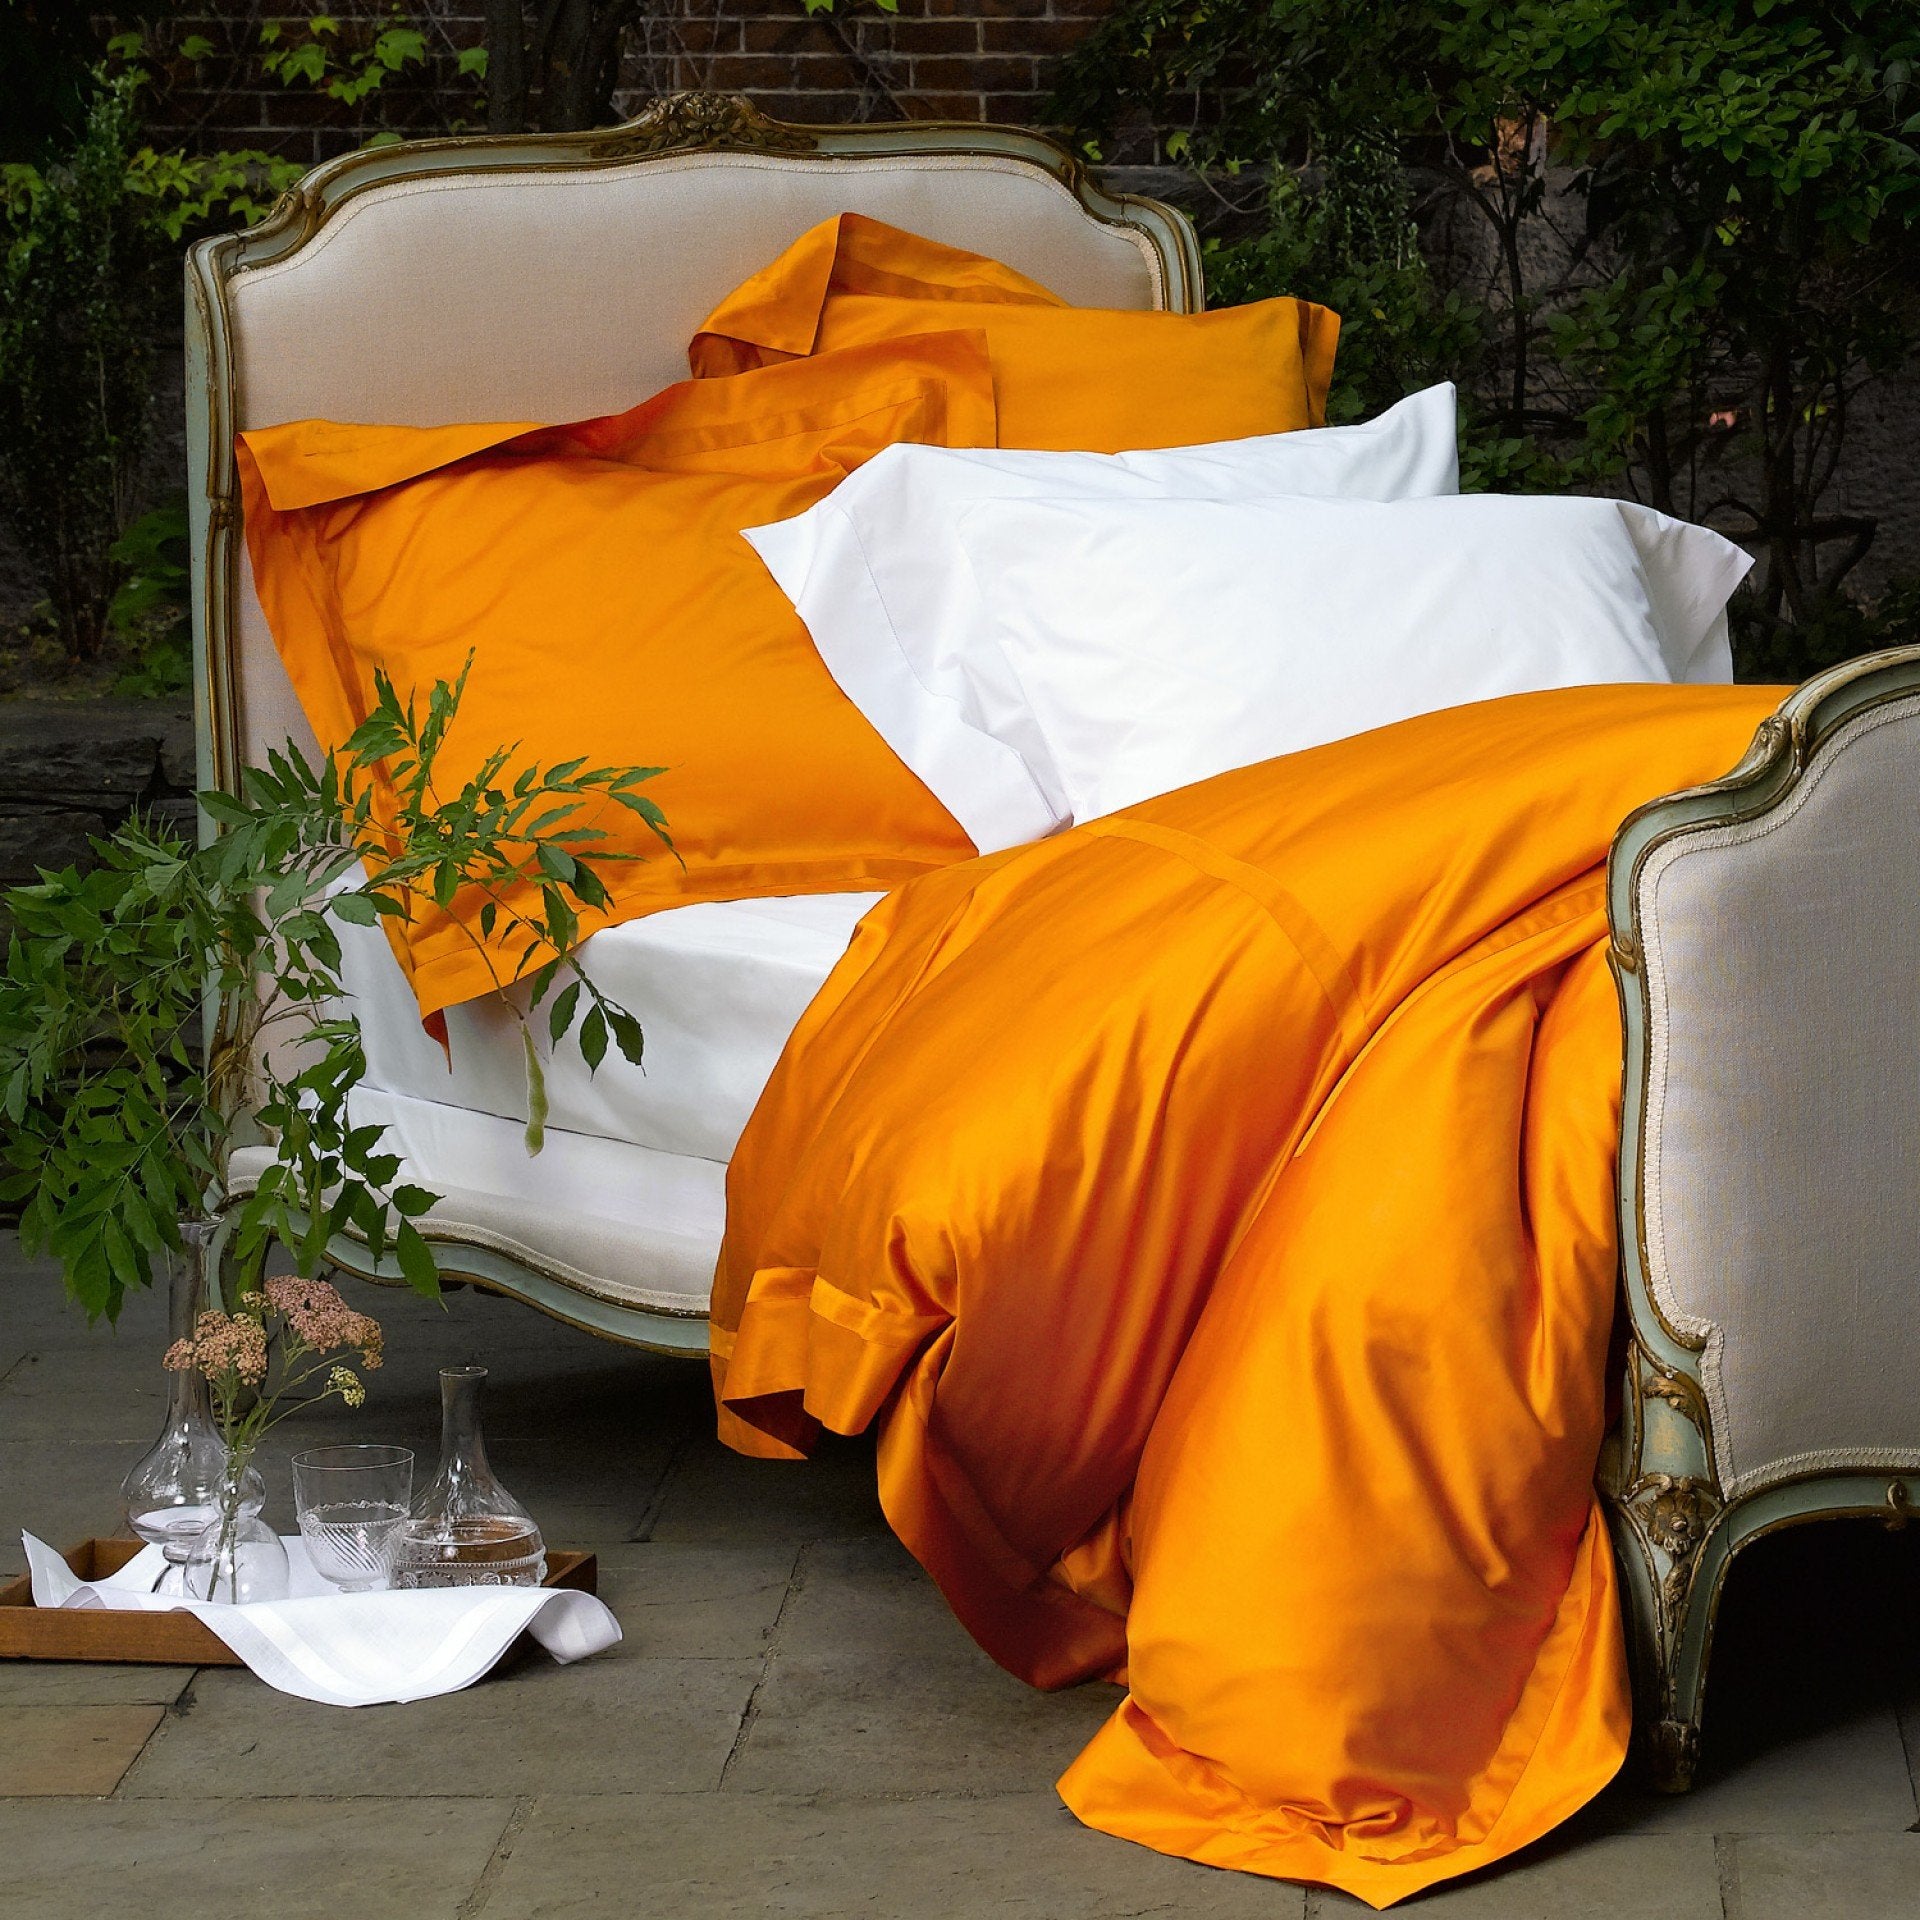 Fig Linens - Nocturne Tangerine Bedding Collection by Matouk - Duvet covers, sheets, shams